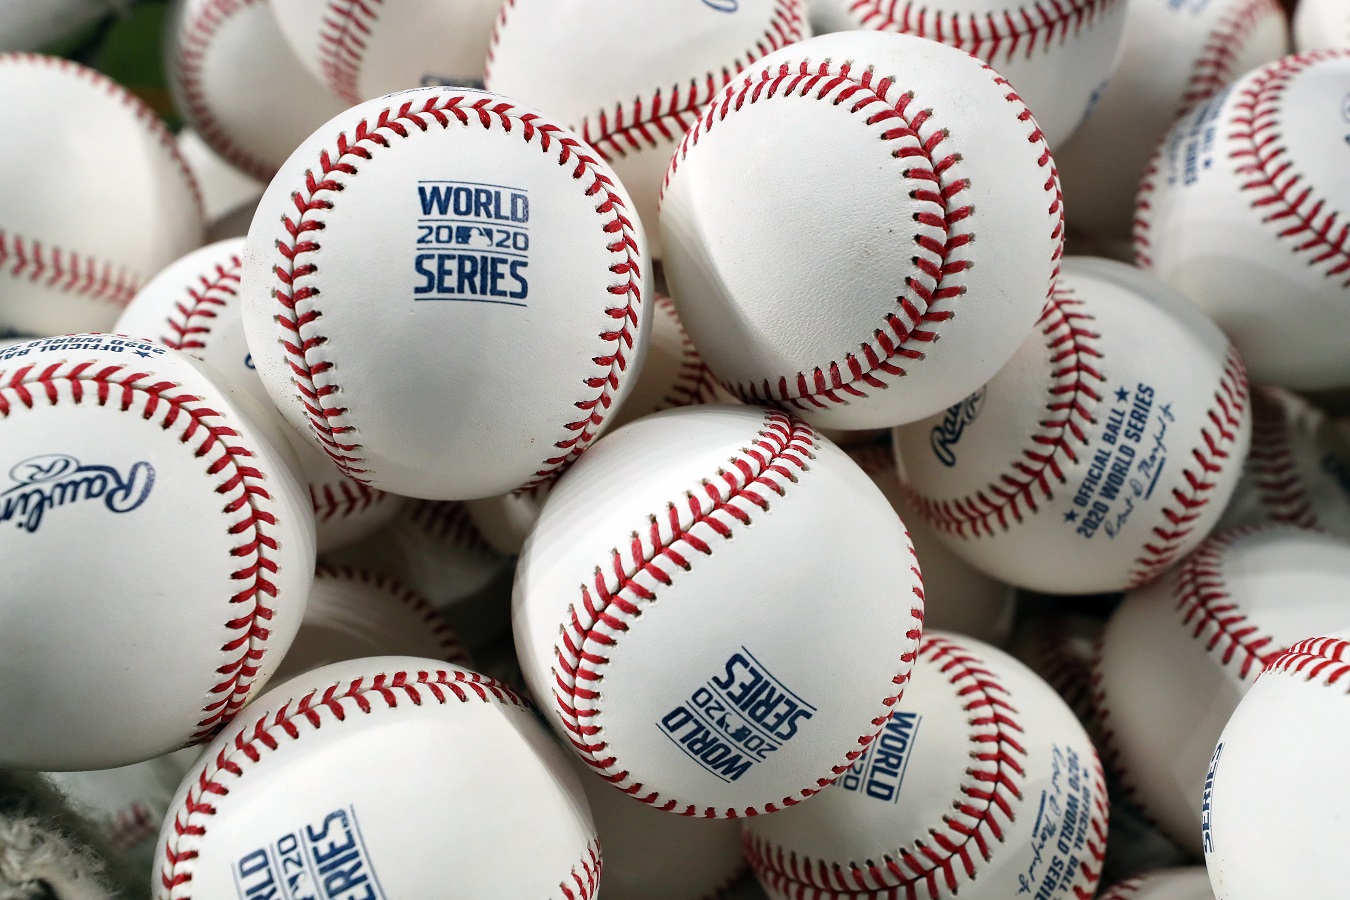 Baseballs used for the 2020 World Series